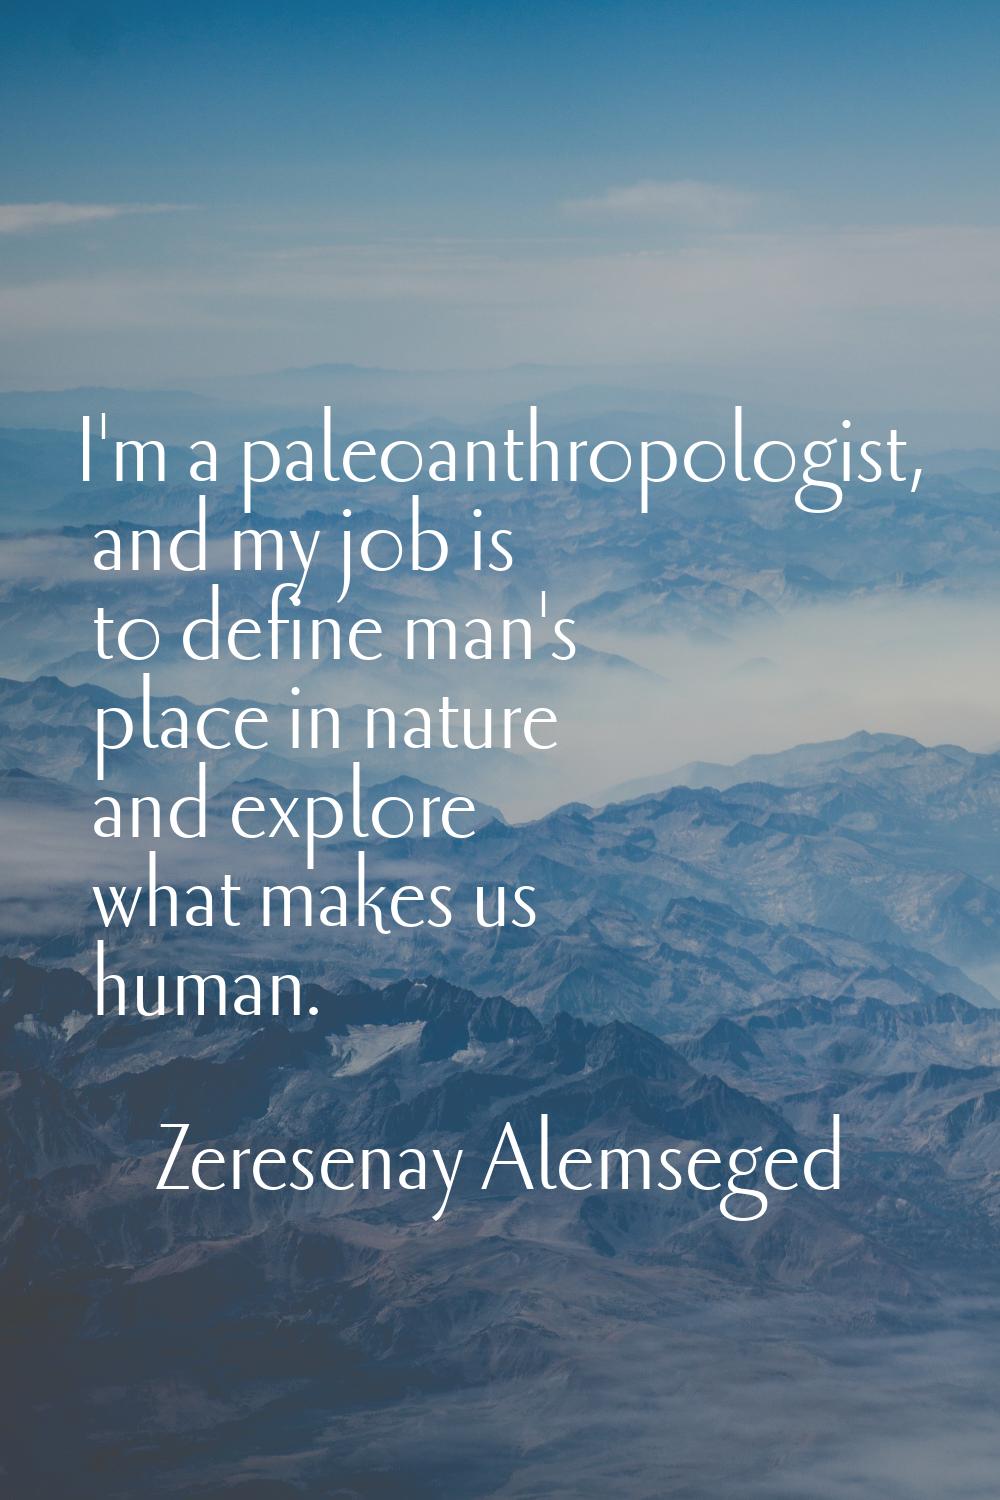 I'm a paleoanthropologist, and my job is to define man's place in nature and explore what makes us 